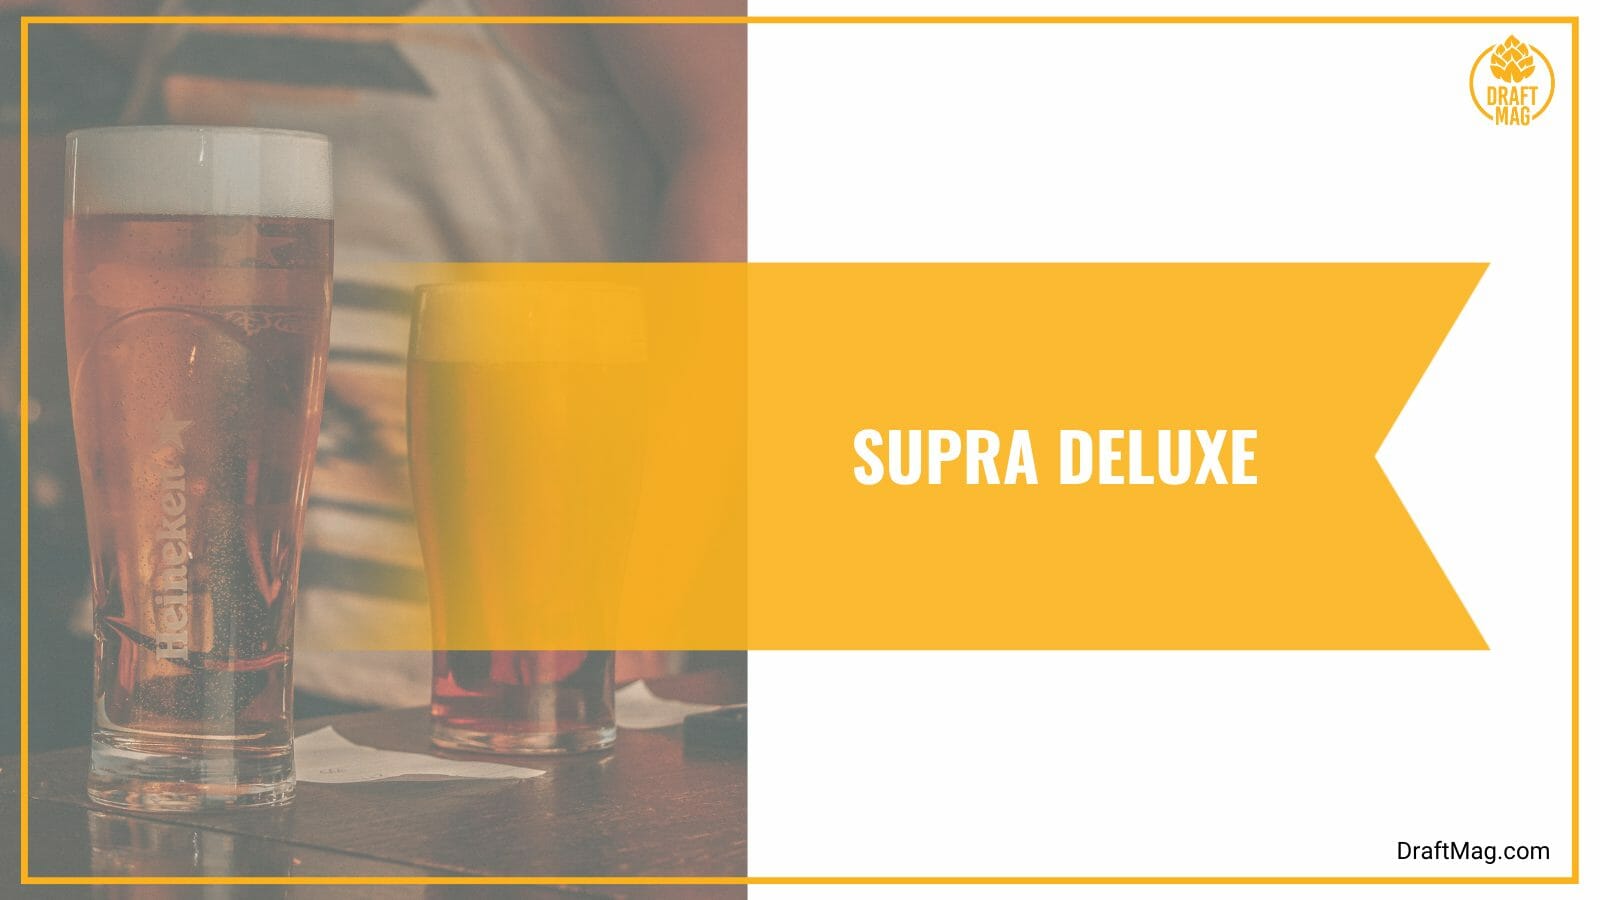 Supra deluxe with a smooth mouthfeel